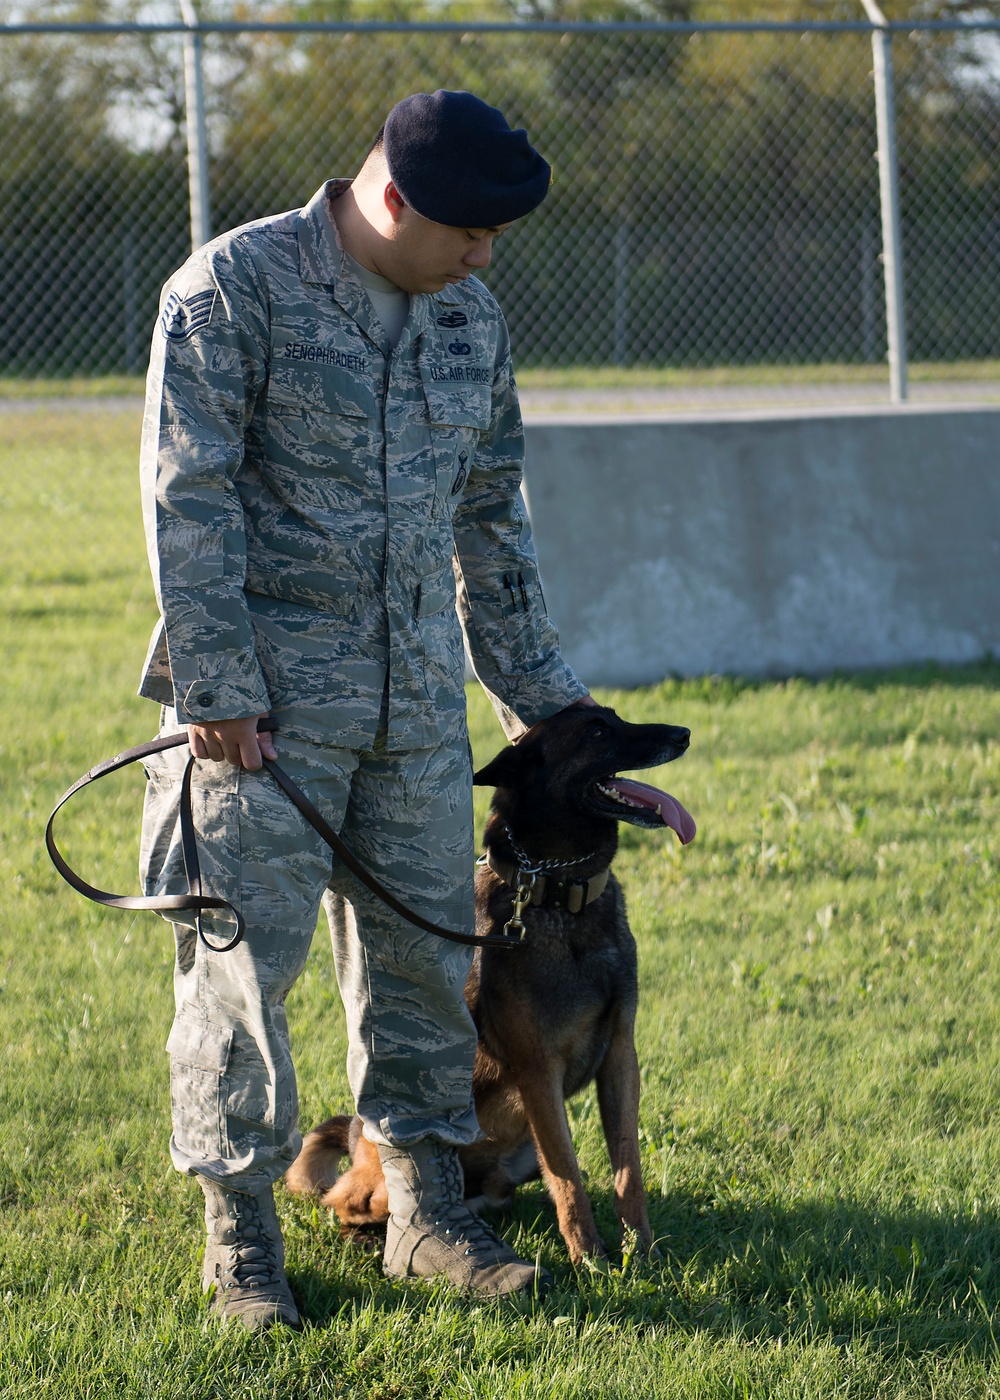 902nd SFS partners with local K-9 unit for training exercise